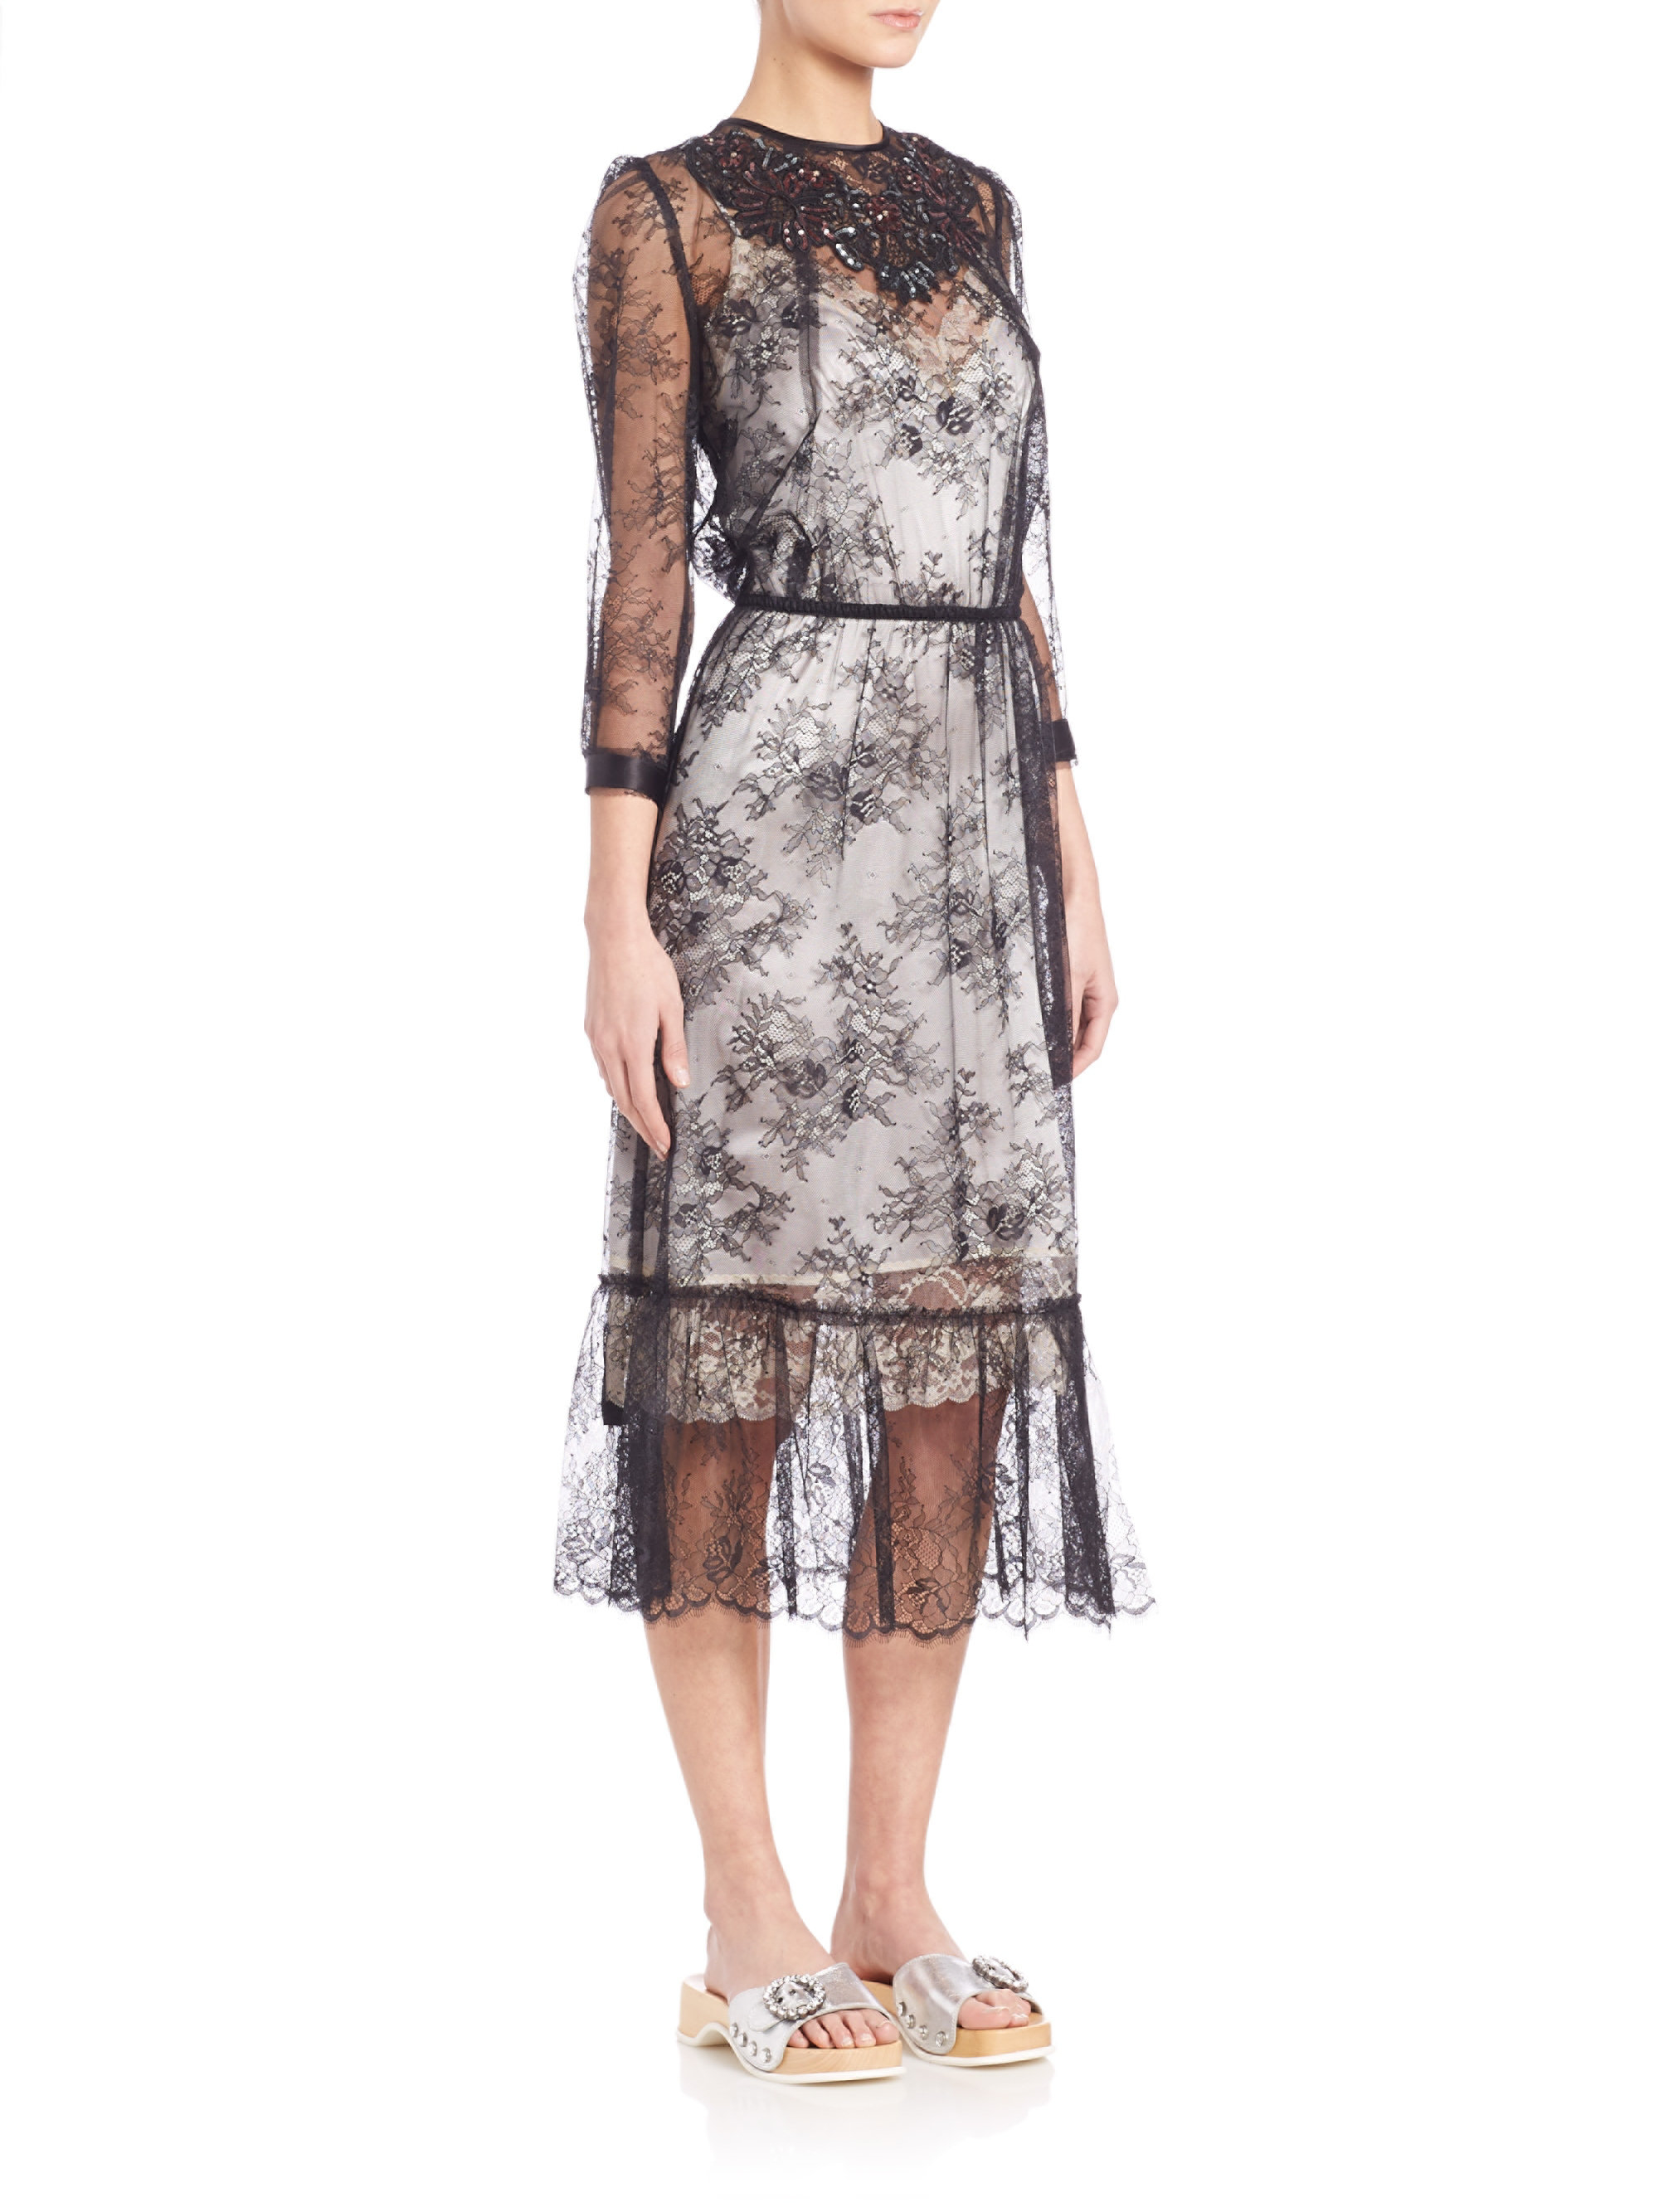 Lyst - Marc Jacobs Embellished Lace Dress in Black